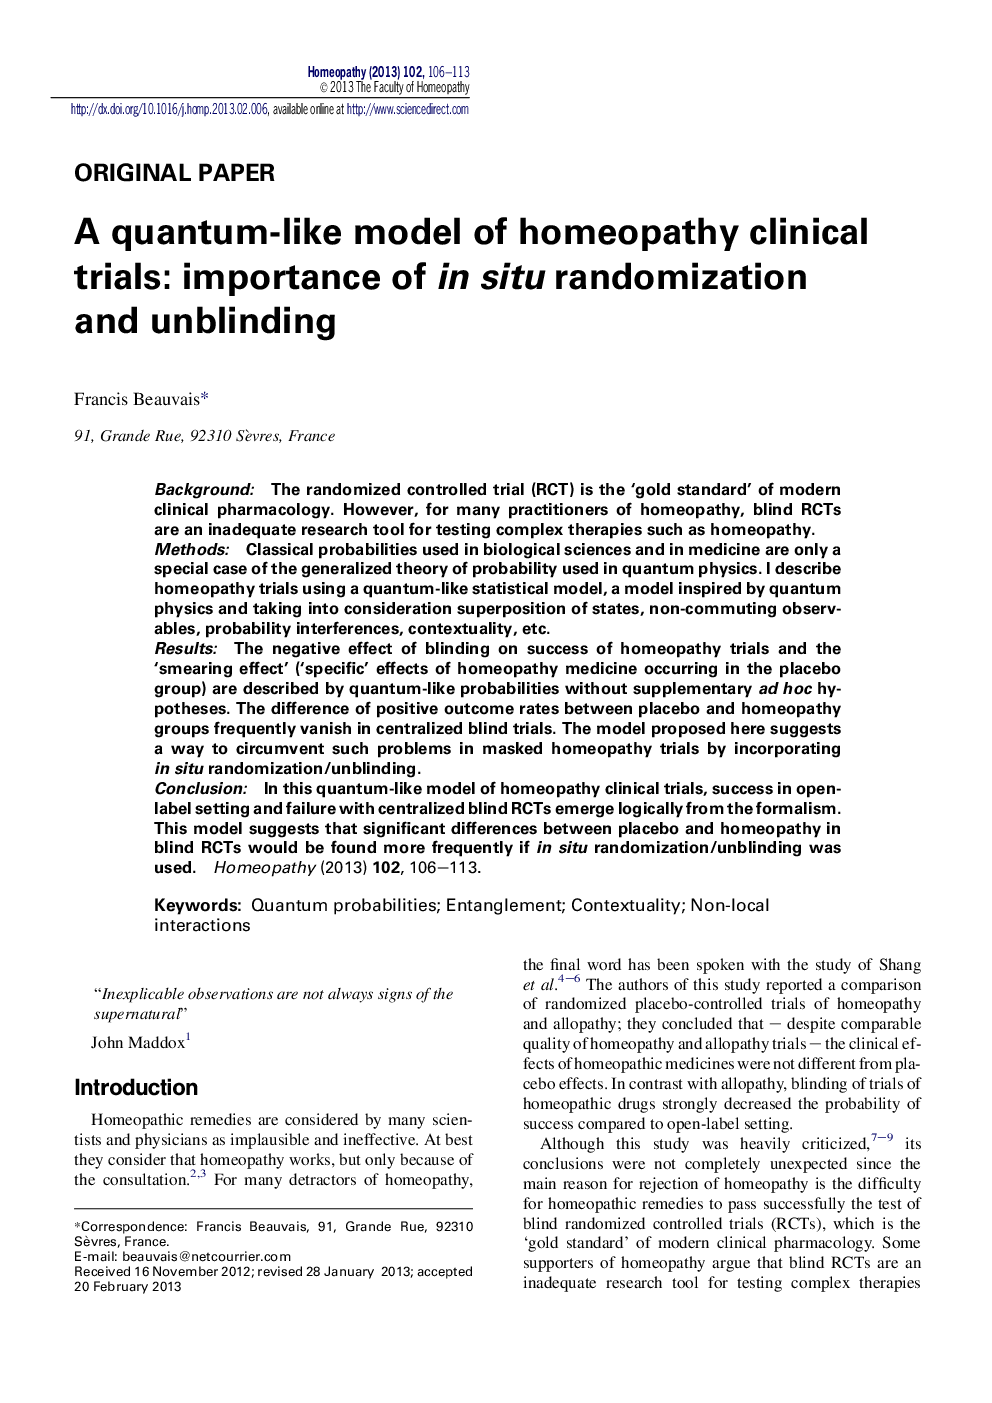 A quantum-like model of homeopathy clinical trials: importance of in situ randomization and unblinding